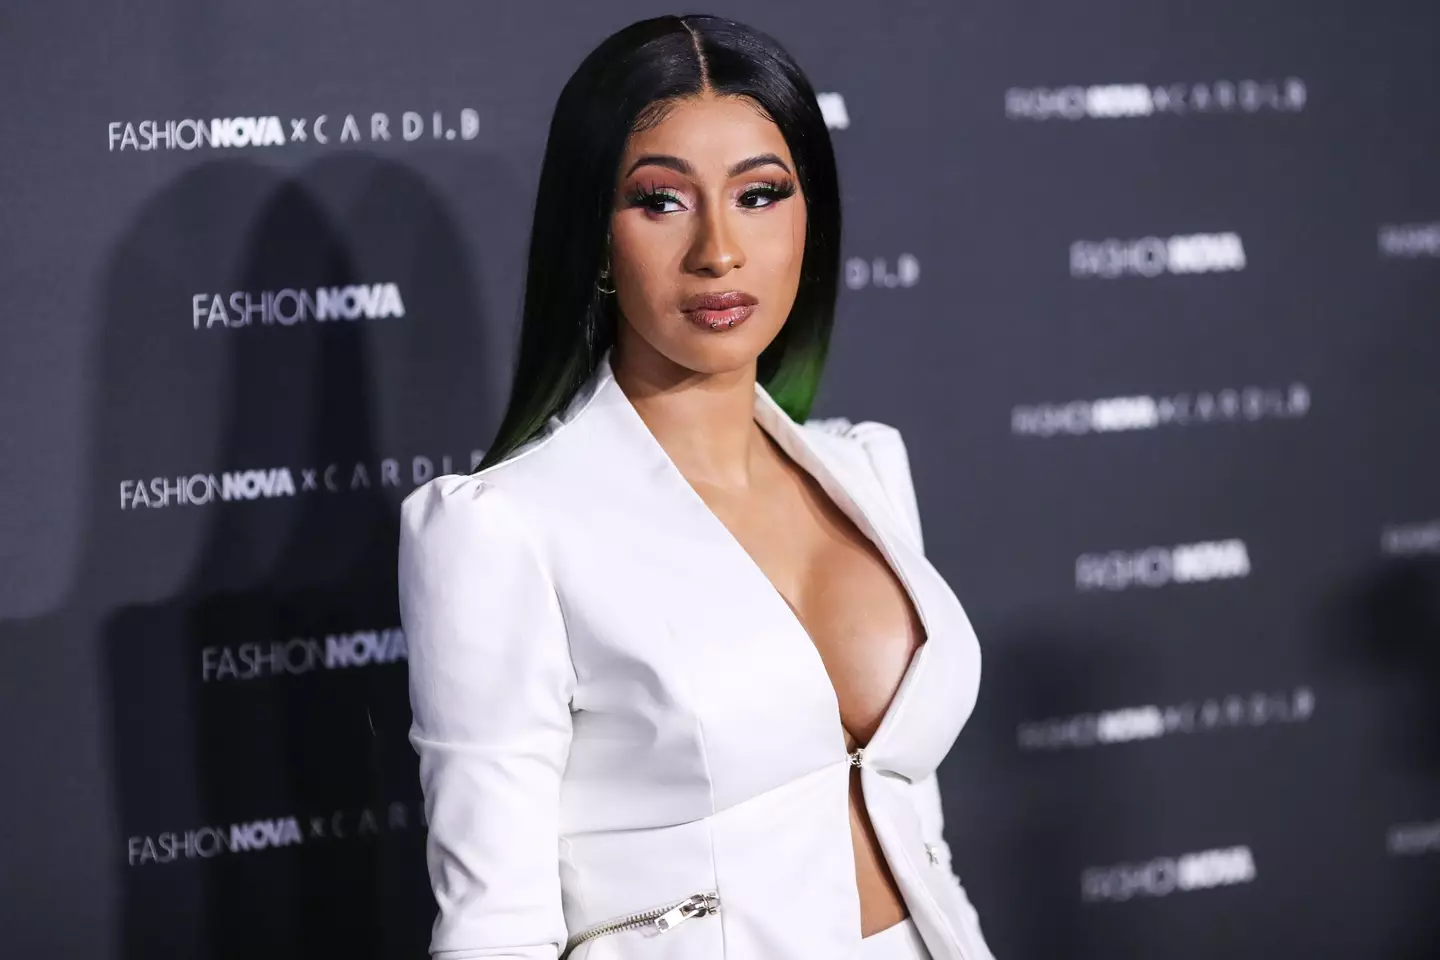 Cardi B was forced to defended her past against internet trolls.